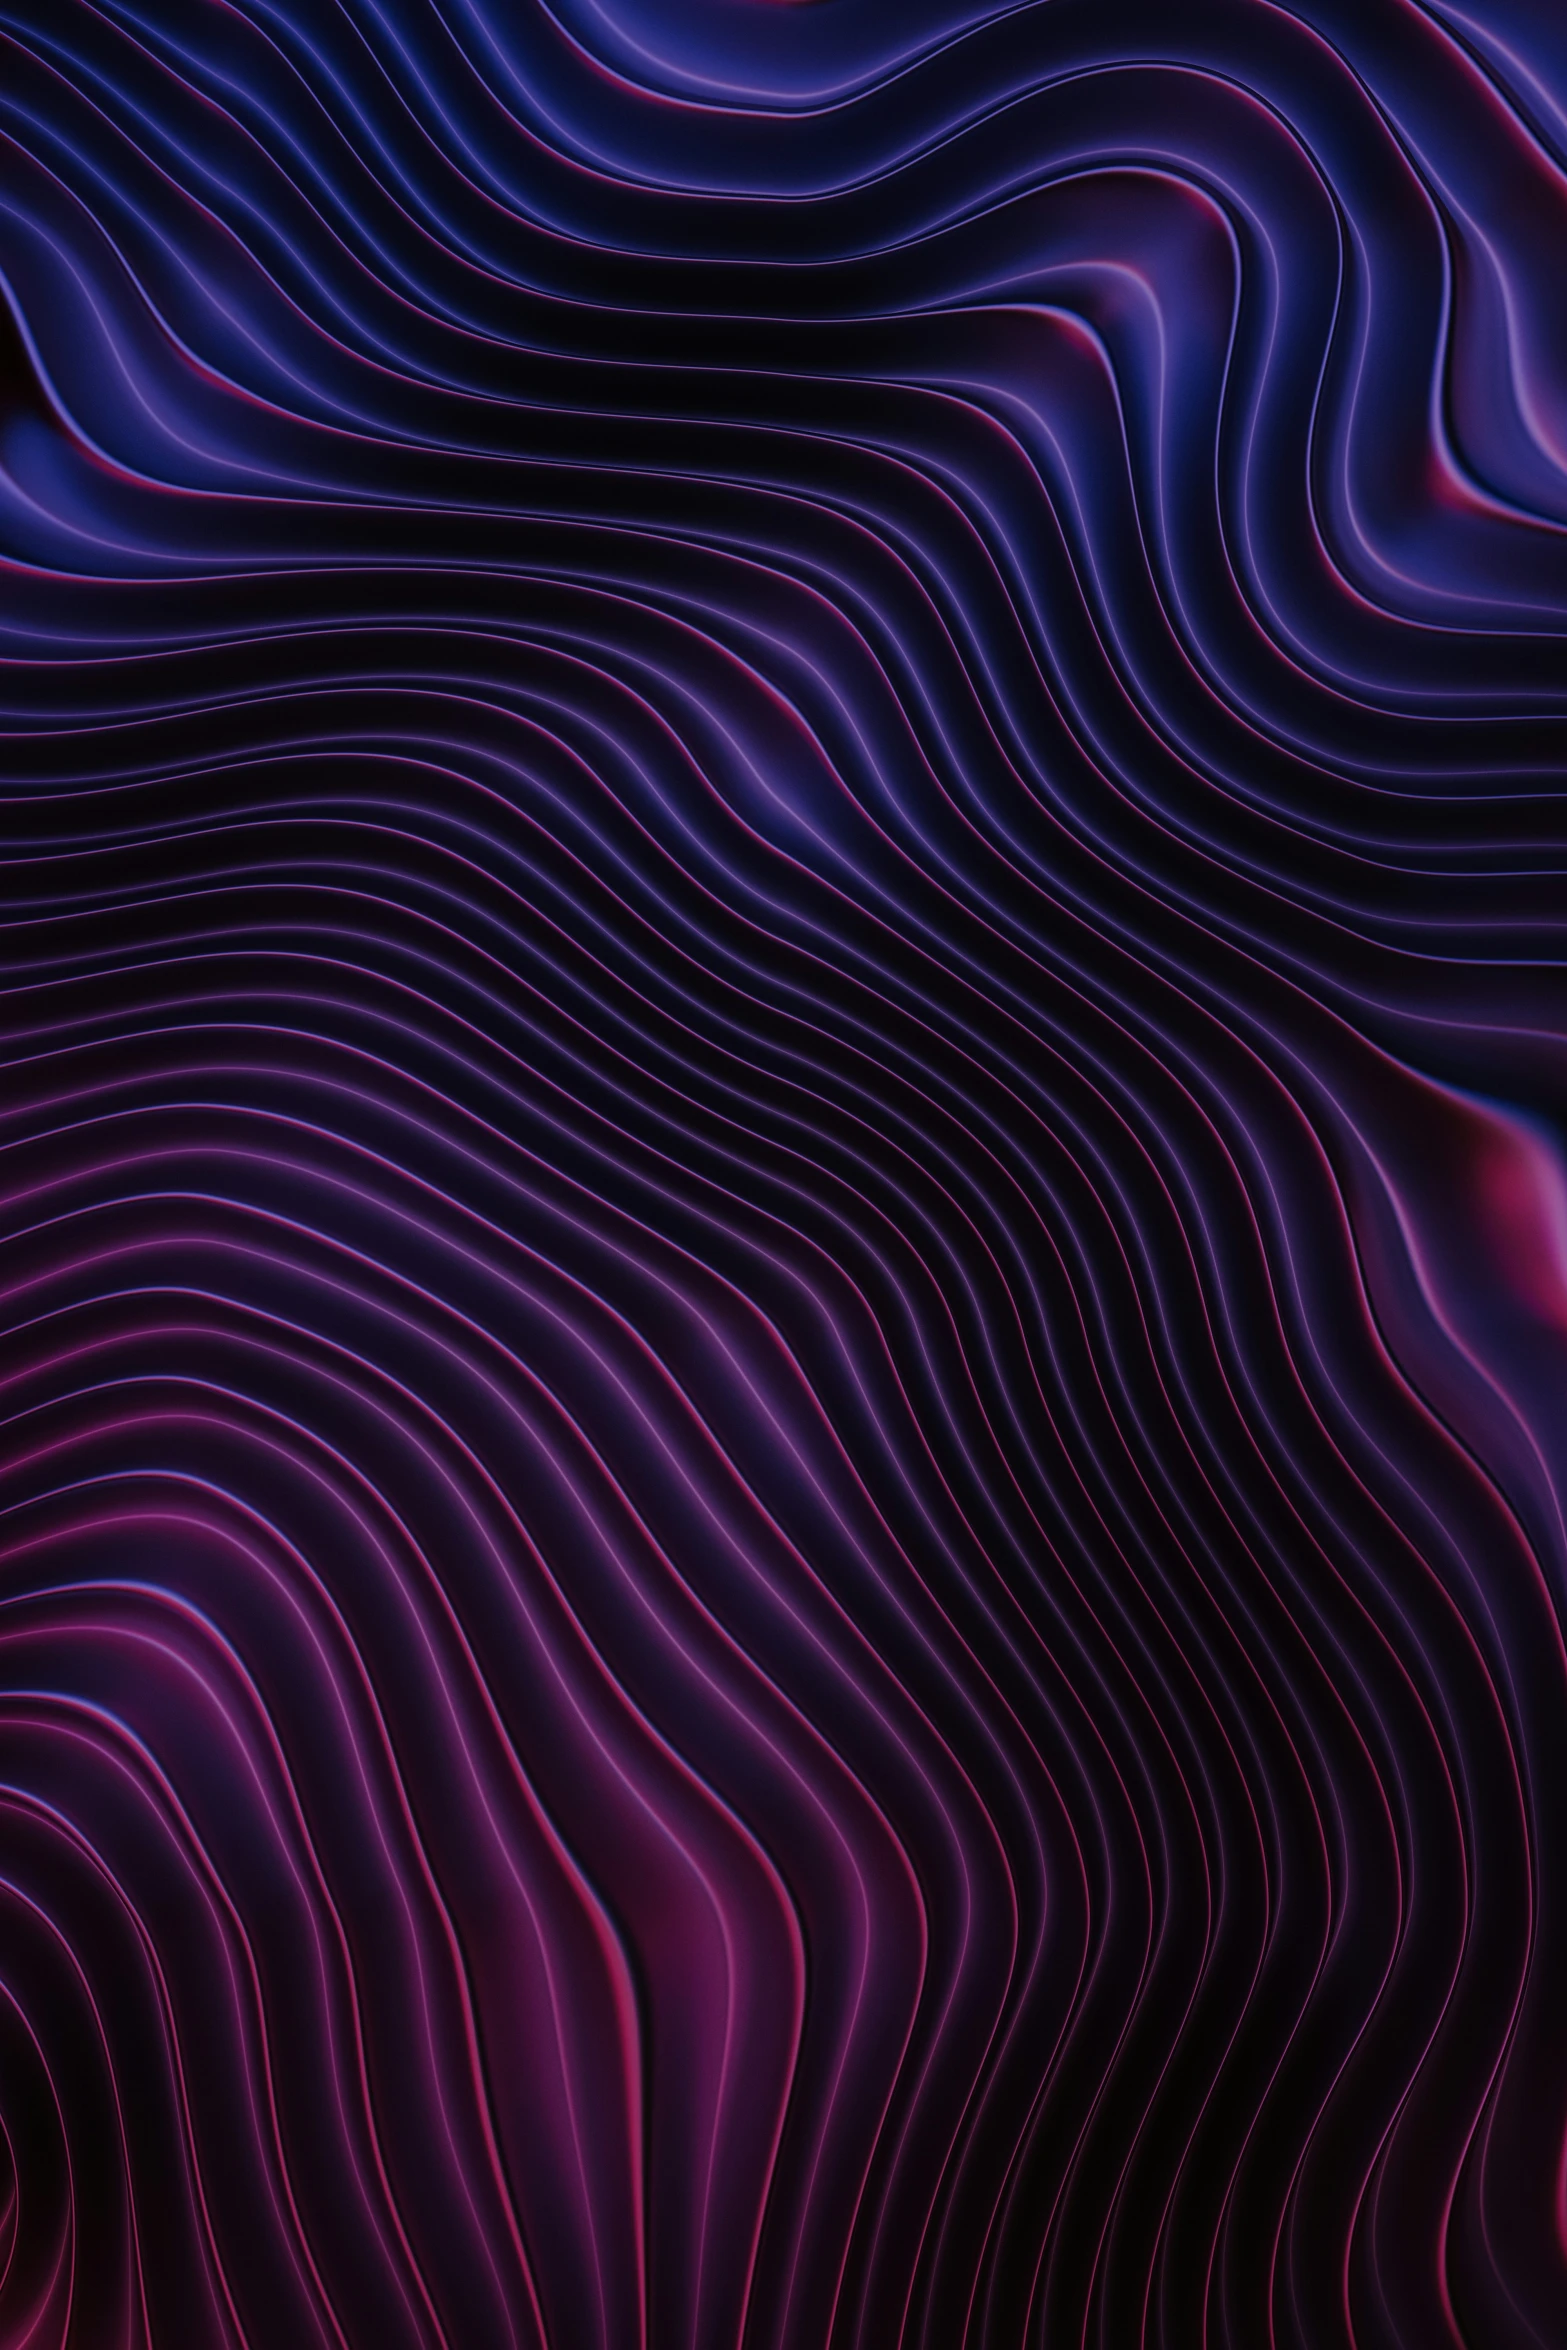 some strange swirl patterns, that is purple and red